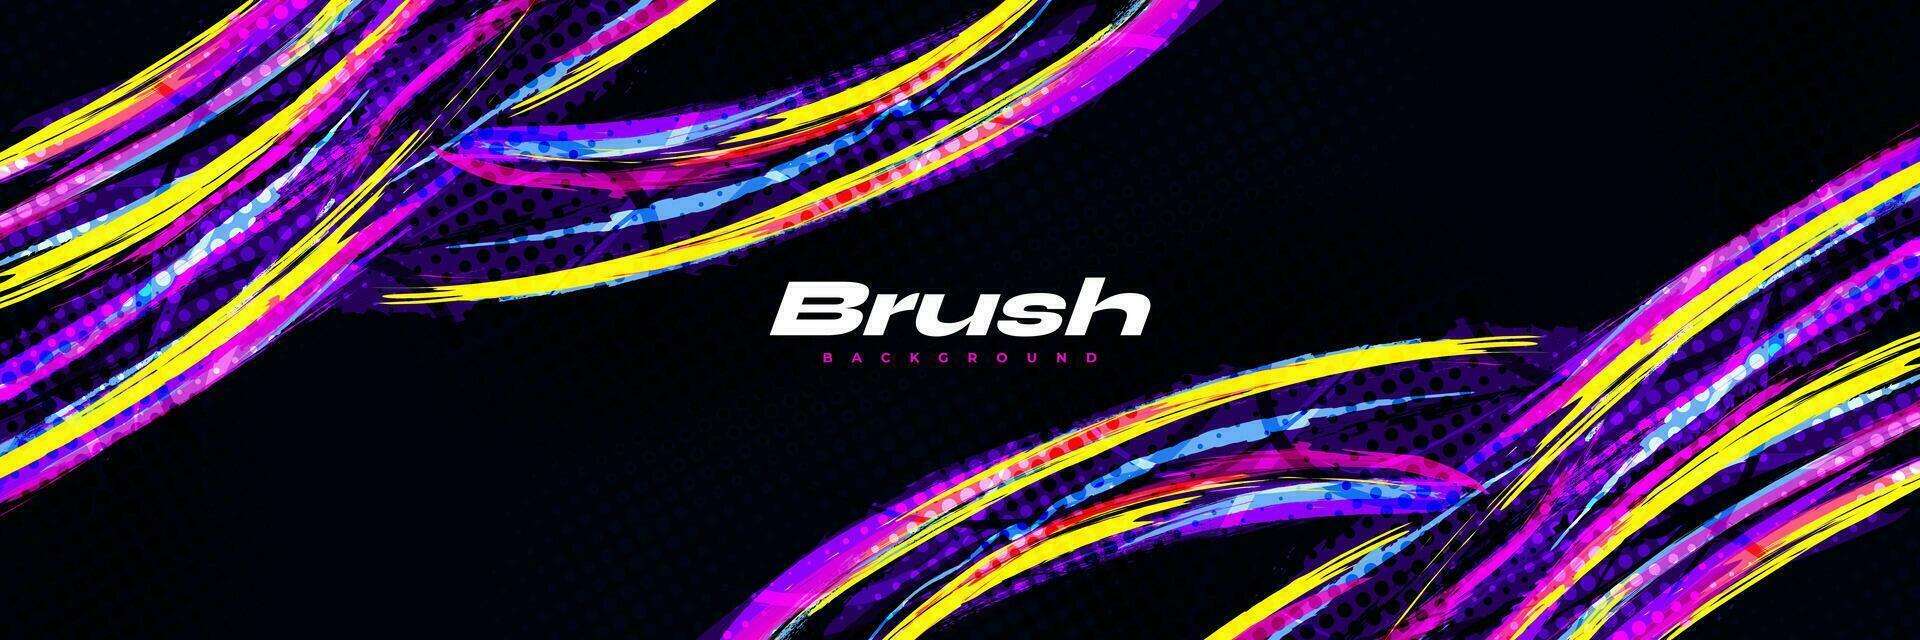 Abstract and Colorful Brush Background with Halftone Effect. Grunge Background. Brush Stroke Illustration for Banner, Poster, or Sports Background. Scratch and Texture Elements For Design vector